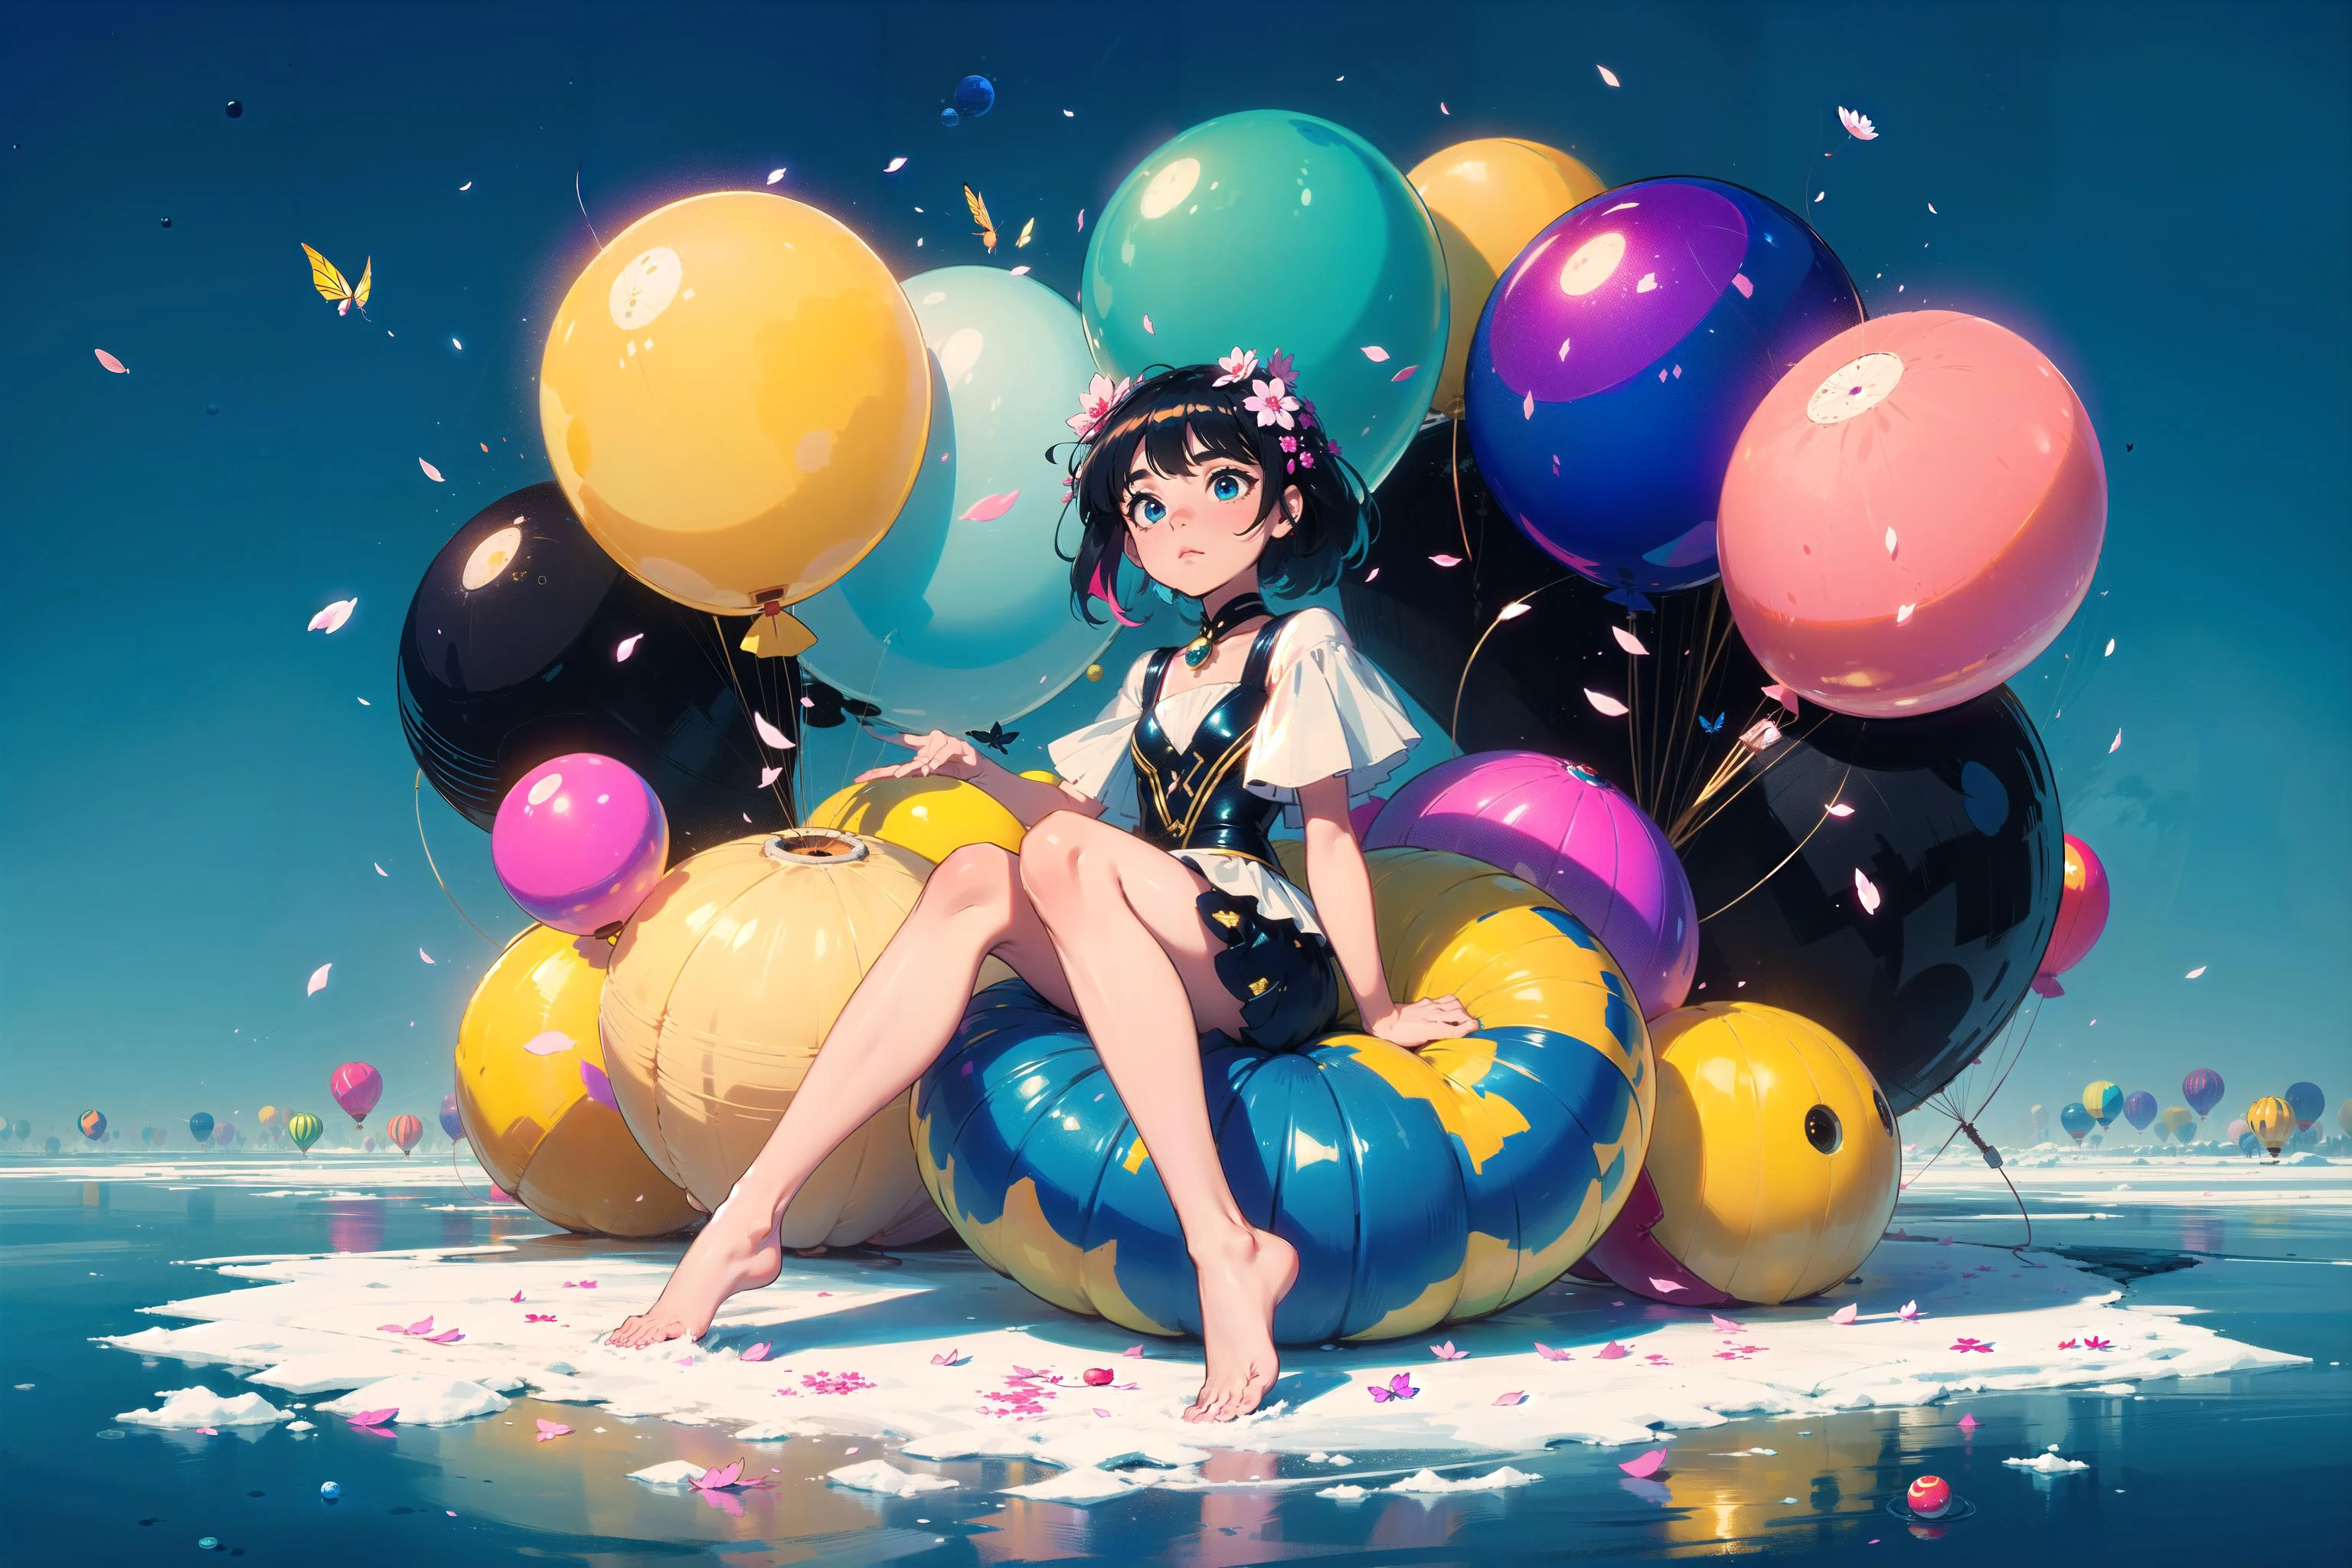 ([balloons:Small planets:0.5]:1.4),(Small_planets inside of balloons:1.4),(lots of colorful Small_planets:1.35),
(colorful planets, earth, floating petals, big balloons:1.22),
1 girl,cute face,
Full body,sitting,detailed beautiful eyes,bare legs,costume combination,Goddess,perfect body,[nsfw:0.88],
(sitting on ice_planet:1.22),
(lots of [floting blue Butterflies:floting ice:0.4]:1.22),
(detailed light),(an extremely delicate and beautiful),volume light,best shadow,cinematic lighting,Depth of field,dynamic angle,Oily skin,